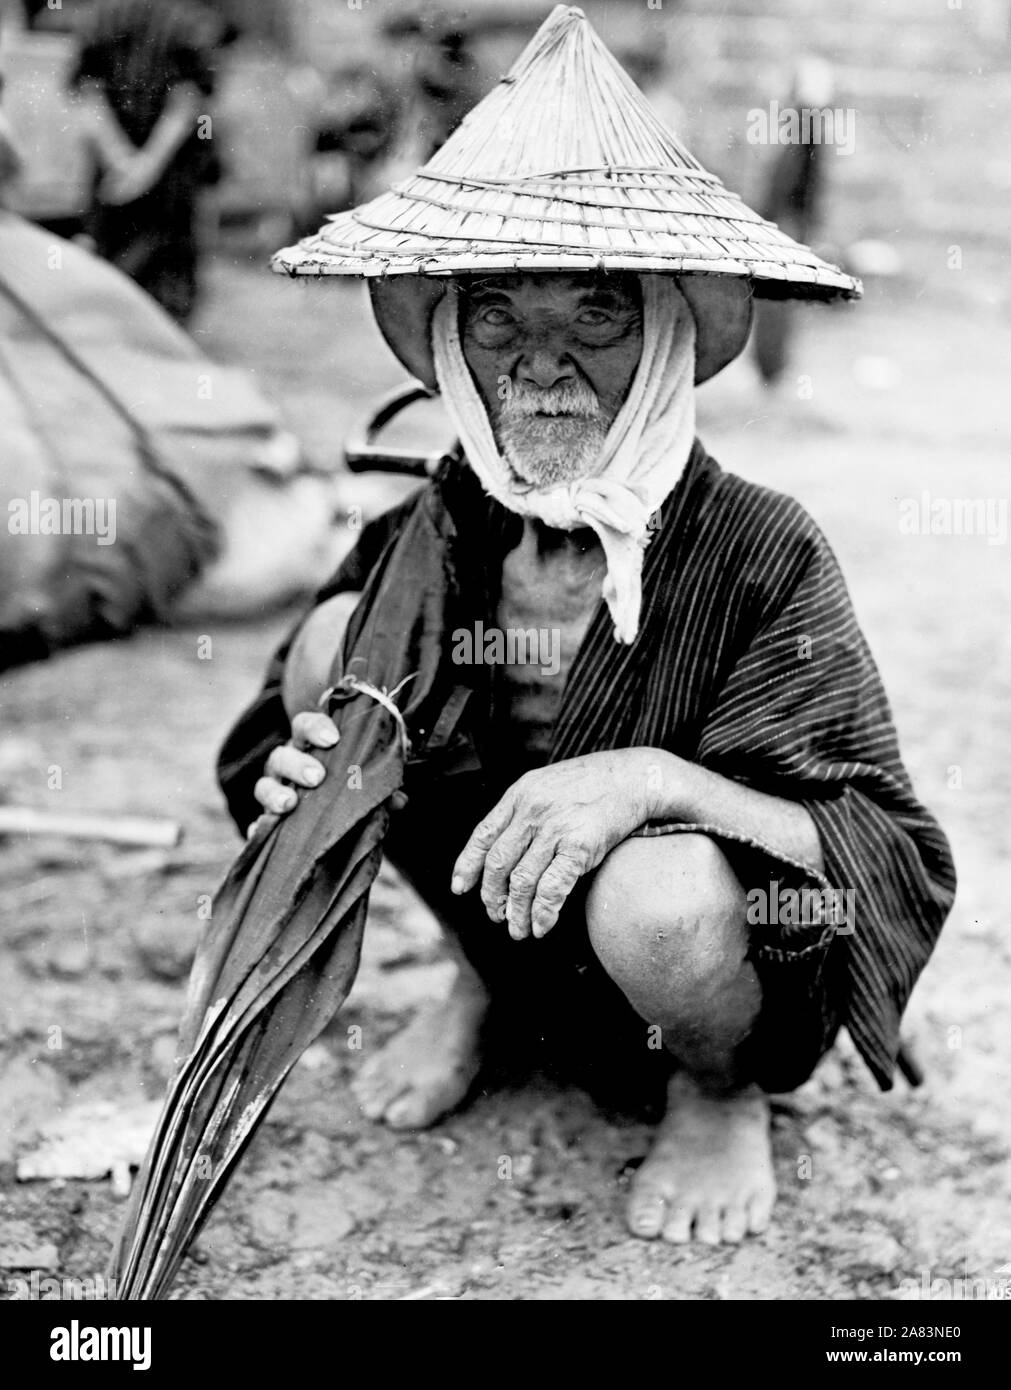 One of the oldest Okinawa natives taken care of by Marines during their invasion of Okinawa Stock Photo